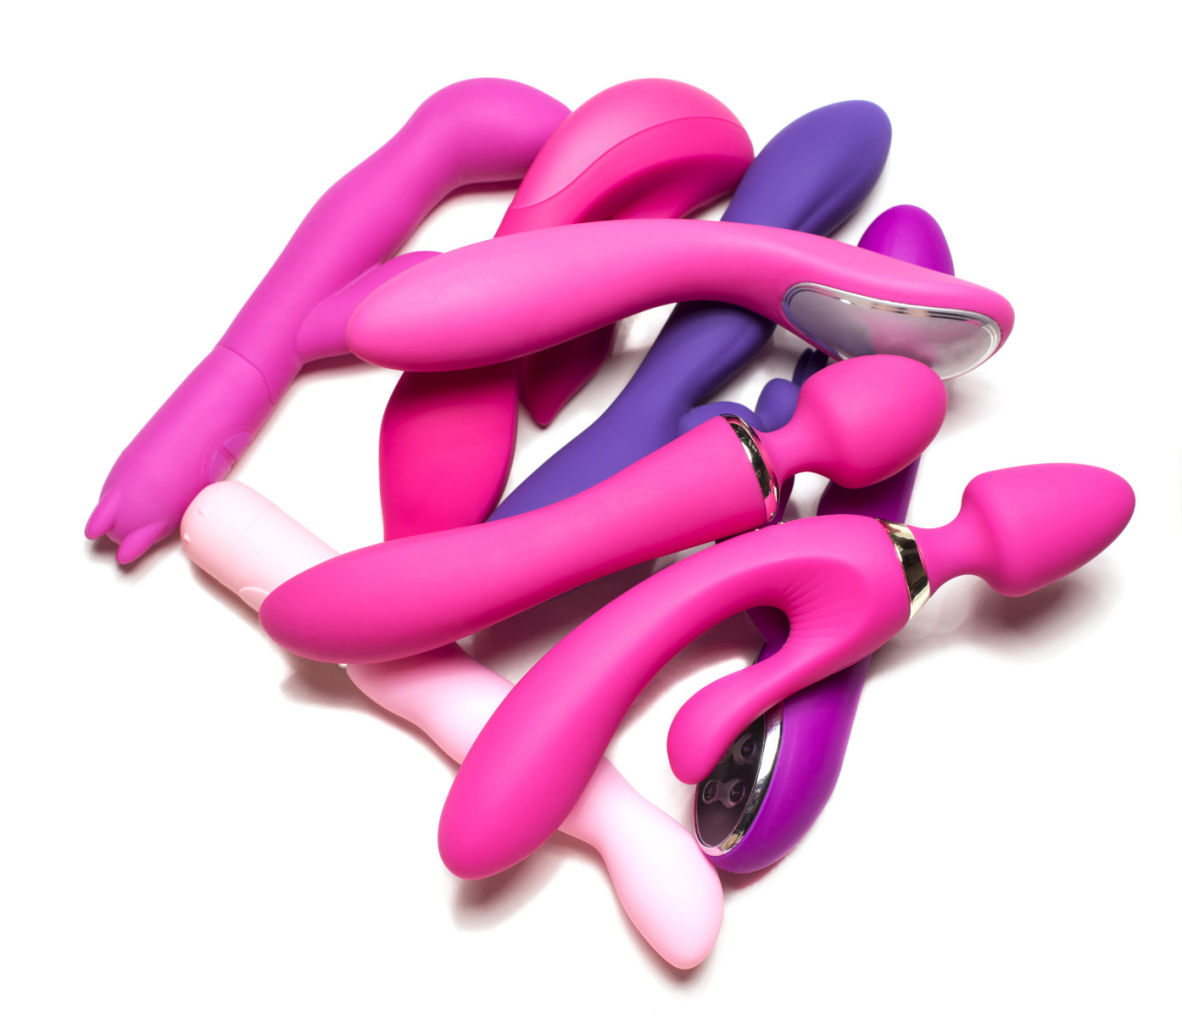 Sex toys for women including vibrators and dildos